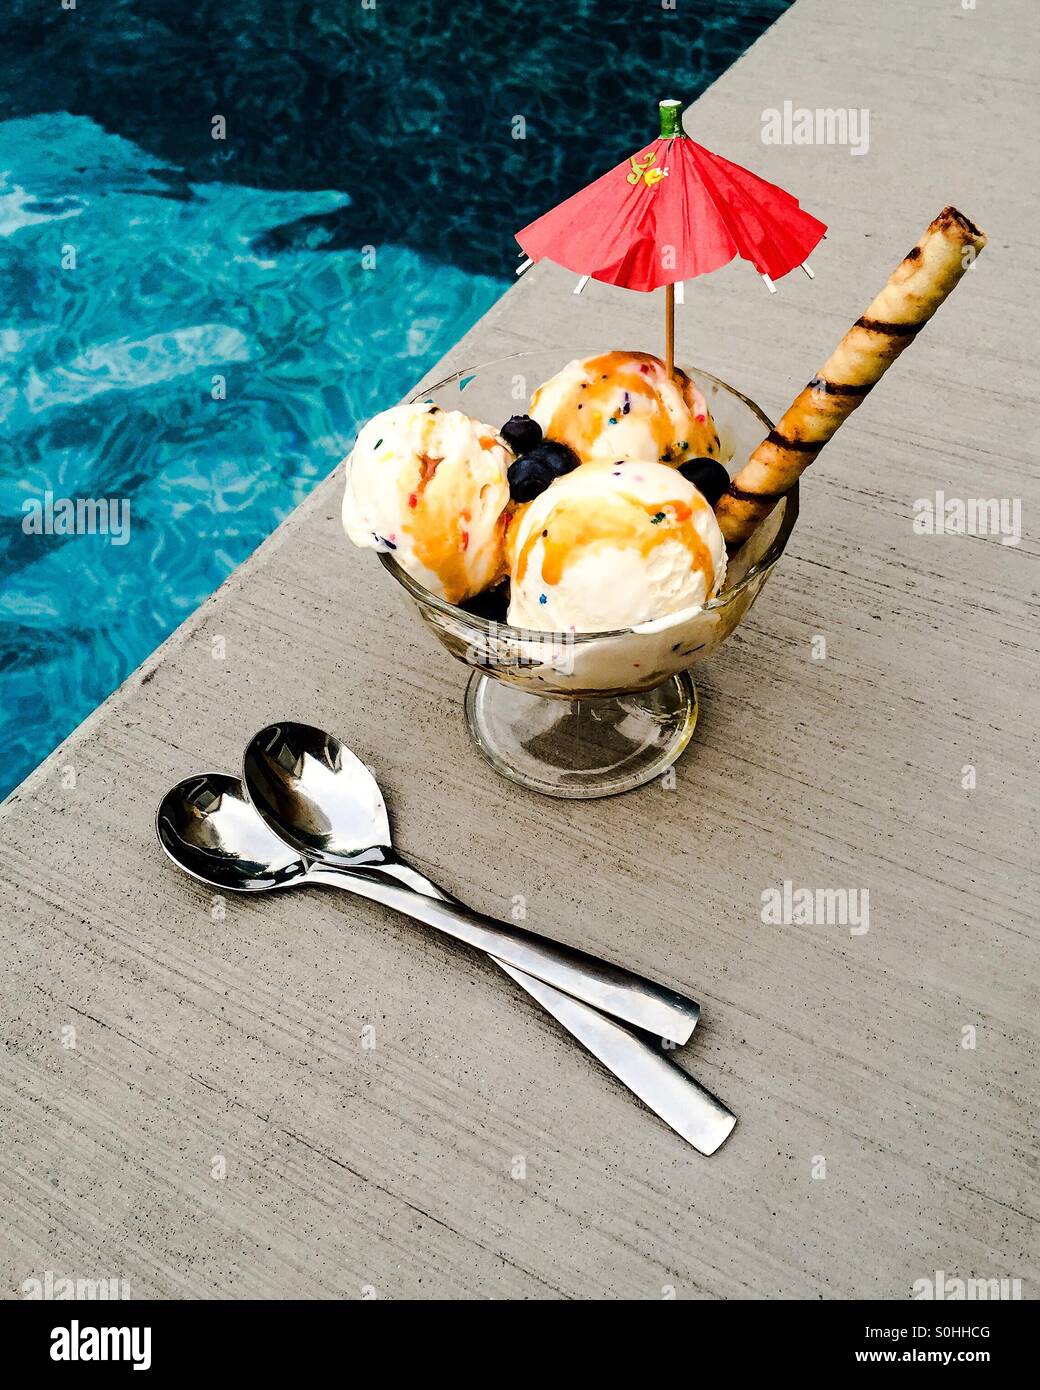 Bowl of ice cream with umbrella and waffle straw in it, sprinkled with blueberries and doused in caramel sauce. There are two spoons next to the frozen treat. Stock Photo